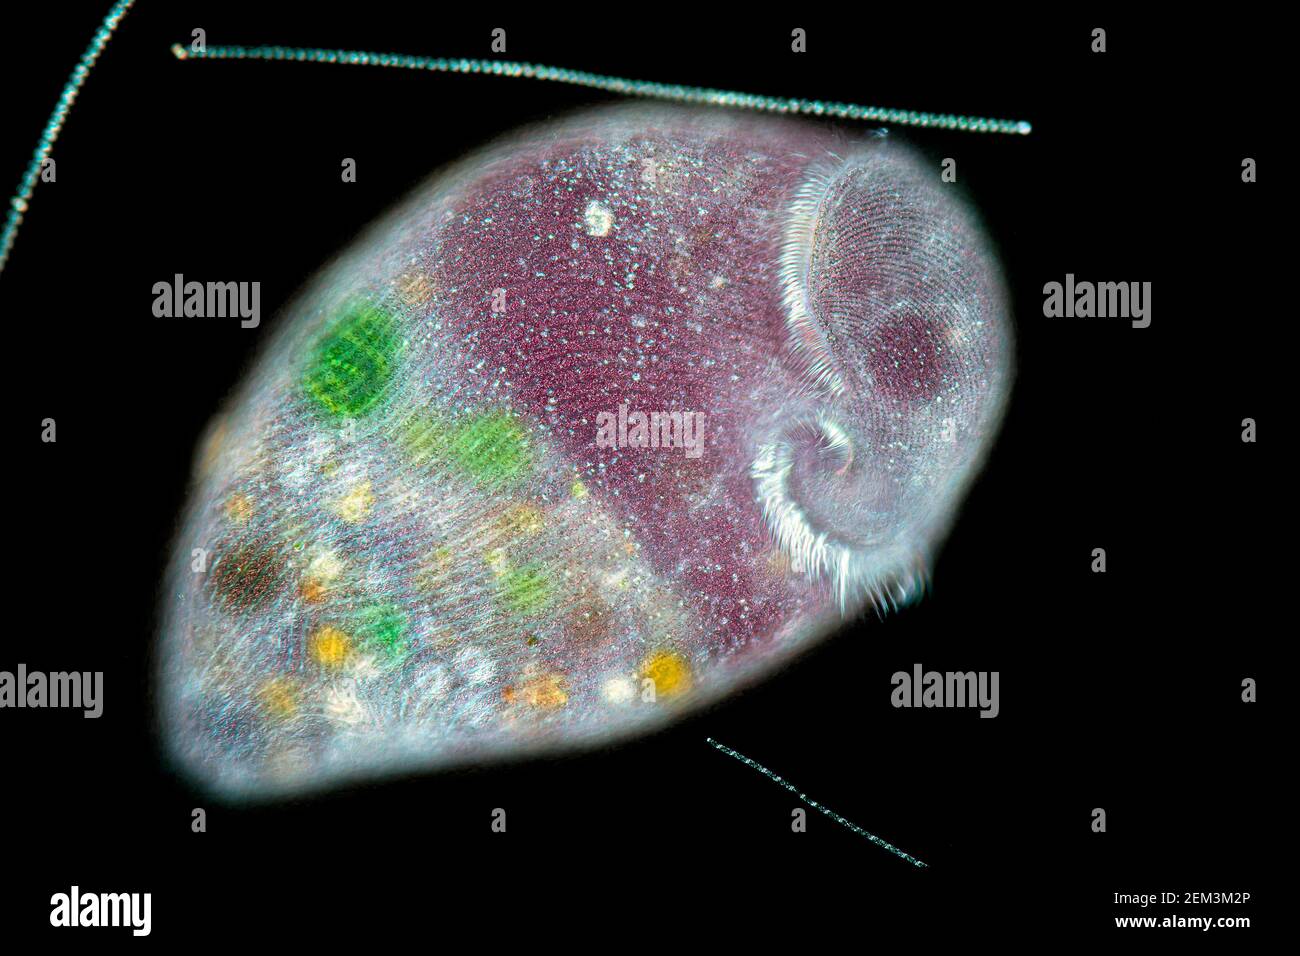 trumpet animalcule (Stentor spec.), differential interference contrast image, magnification x40 related to 35 mm, Germany Stock Photo